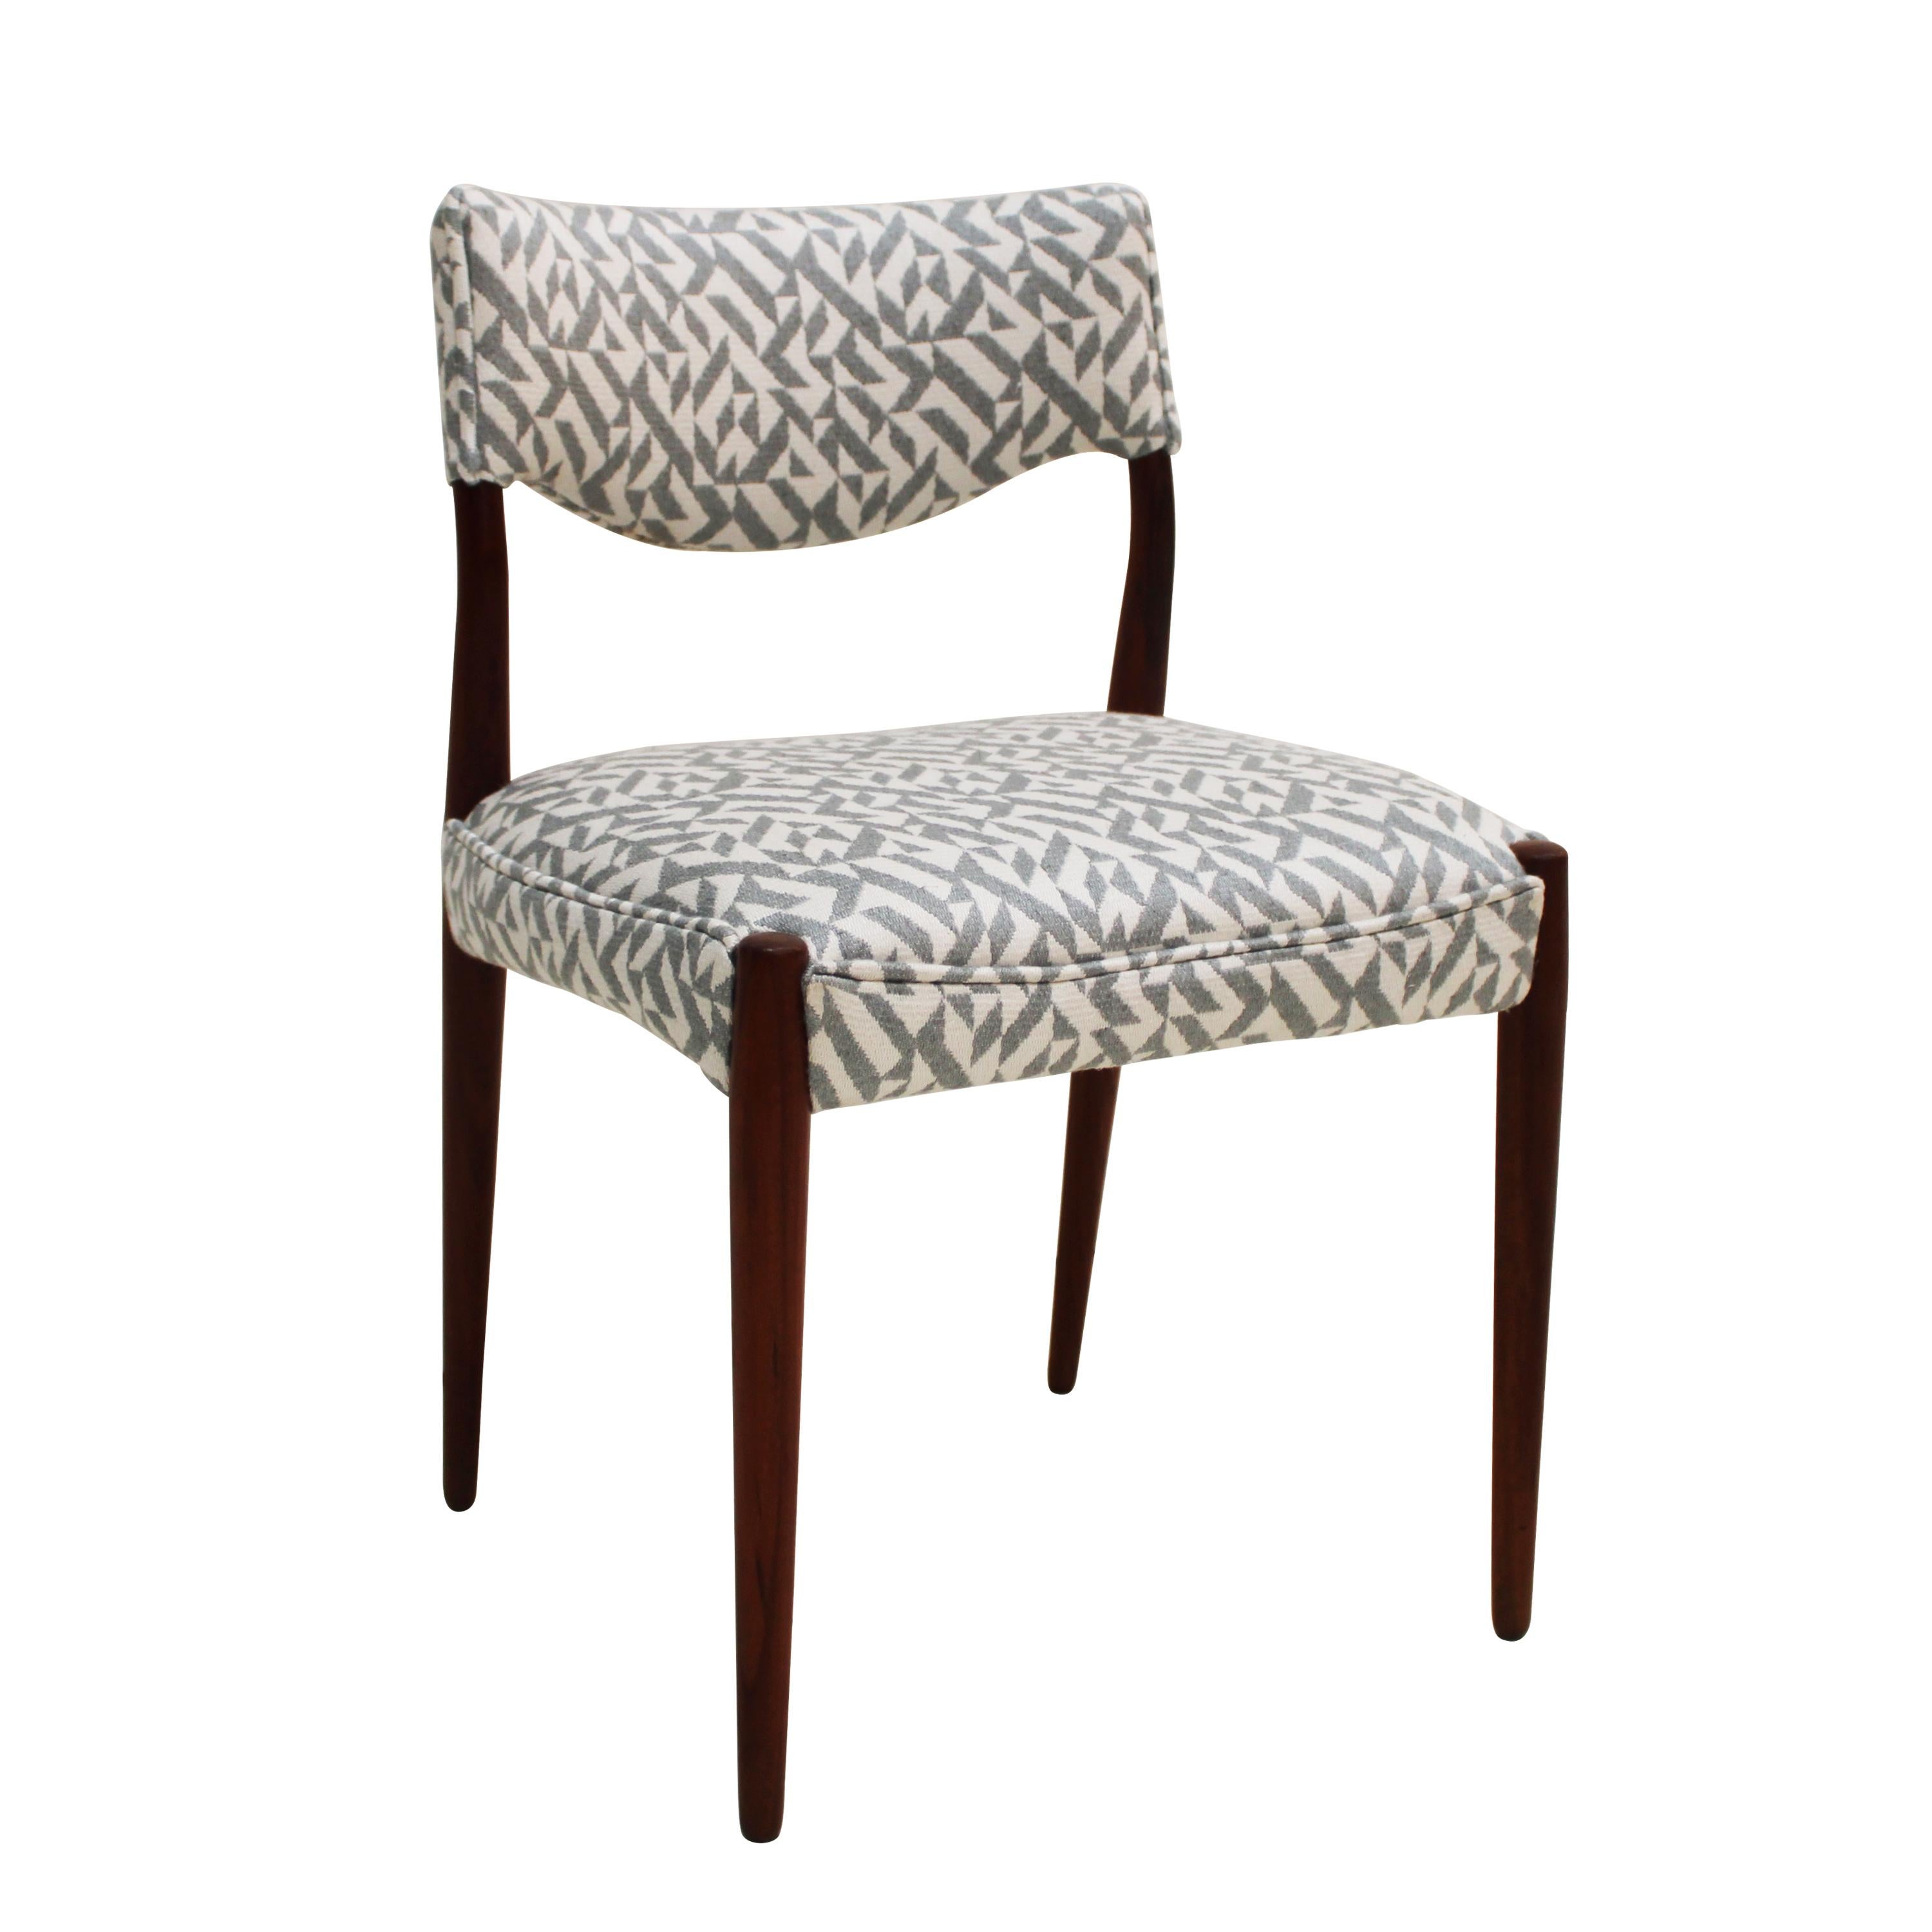 Set of five scandinavian chairs made in solid mahogany wood. Reupholstered in geometric patterned fabric.